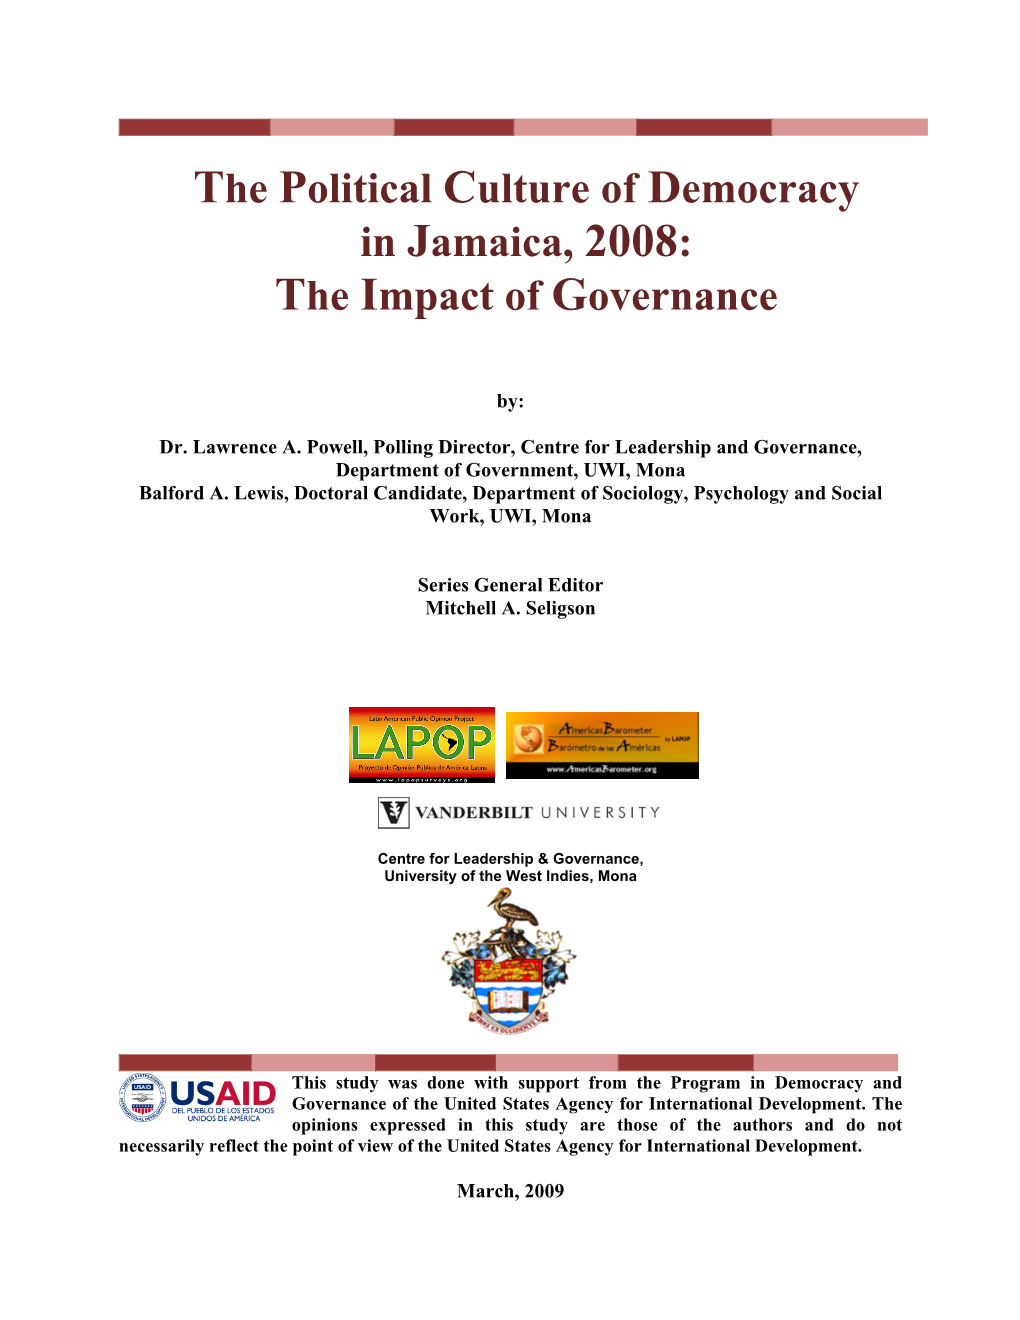 The Political Culture of Democracy in Jamaica, 2008: the Impact of Governance